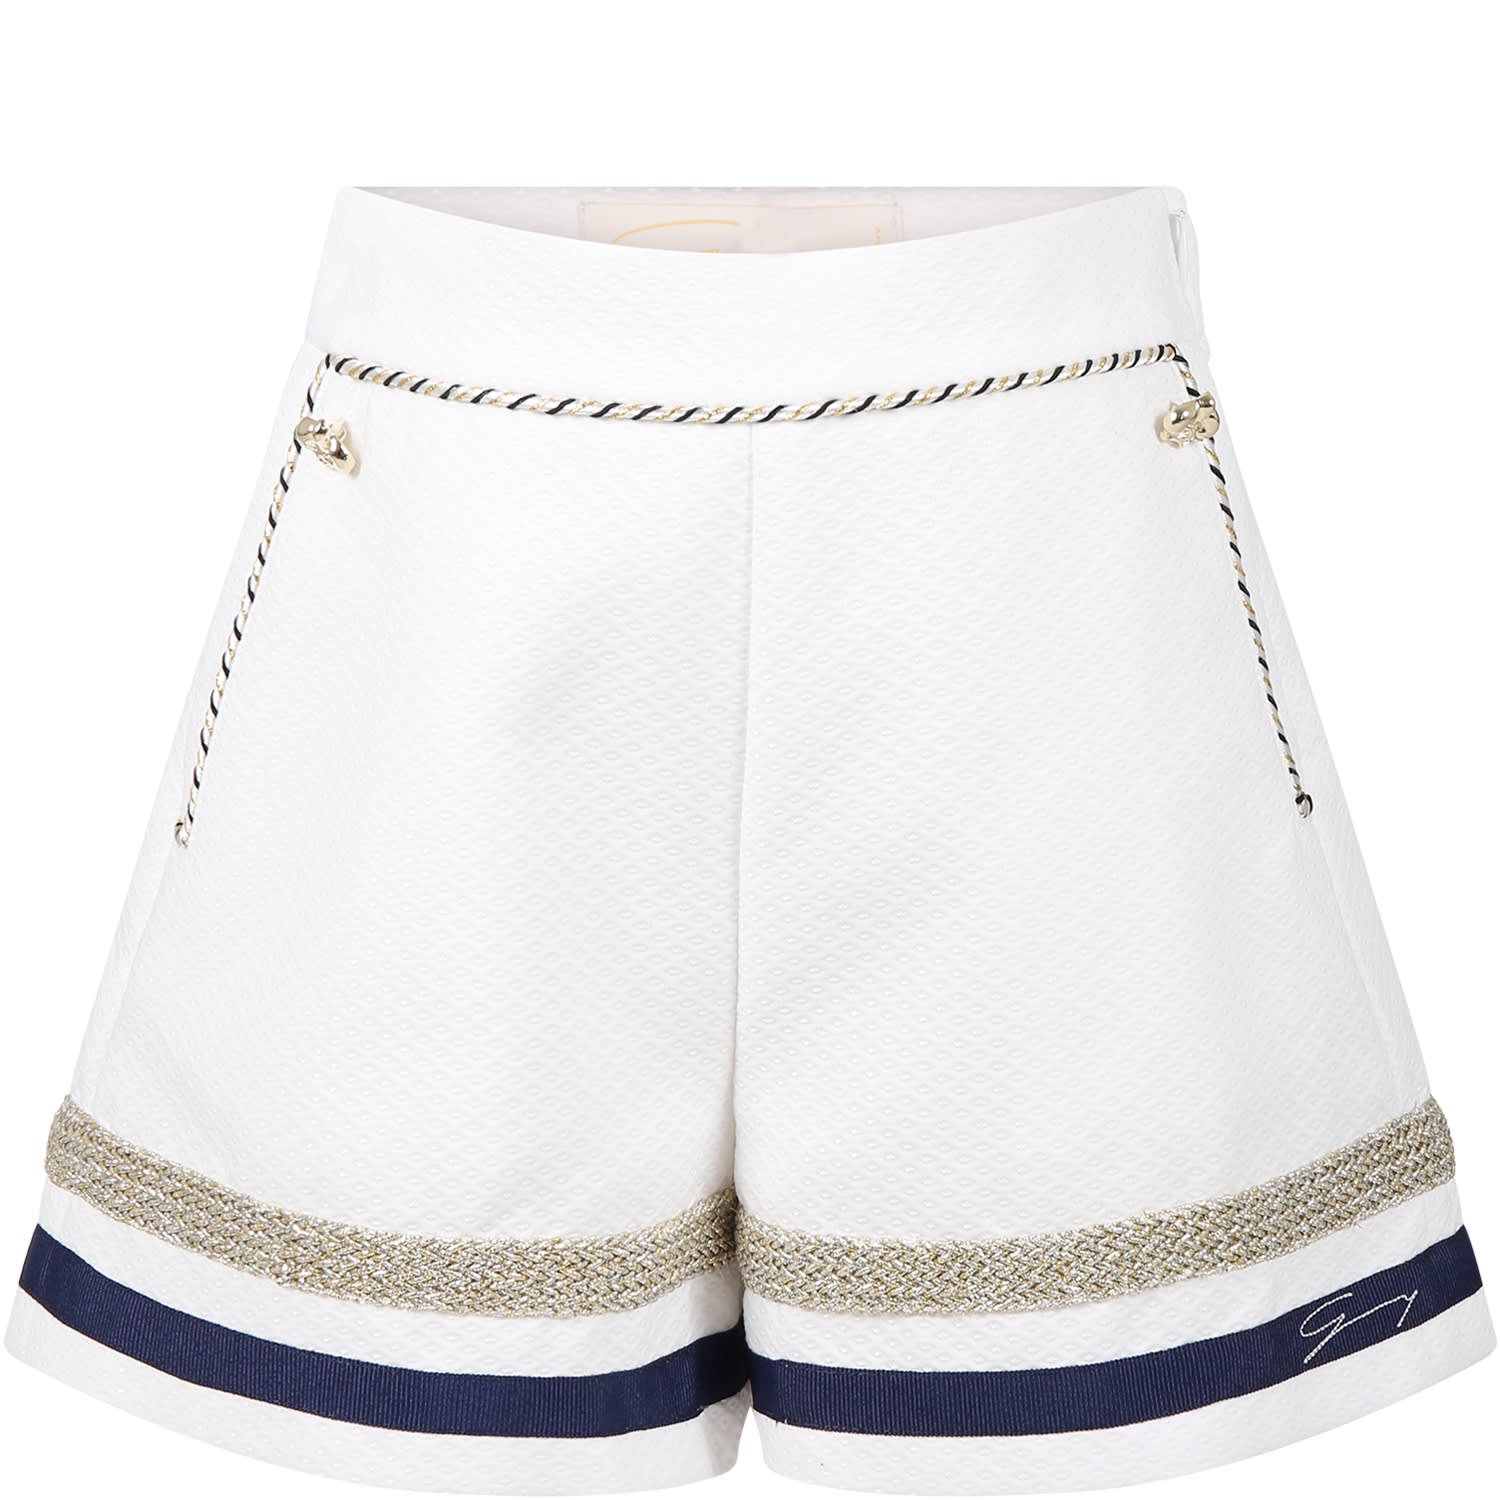 Genny Kids' White Shorts For Girl With Blue And Lurex Details